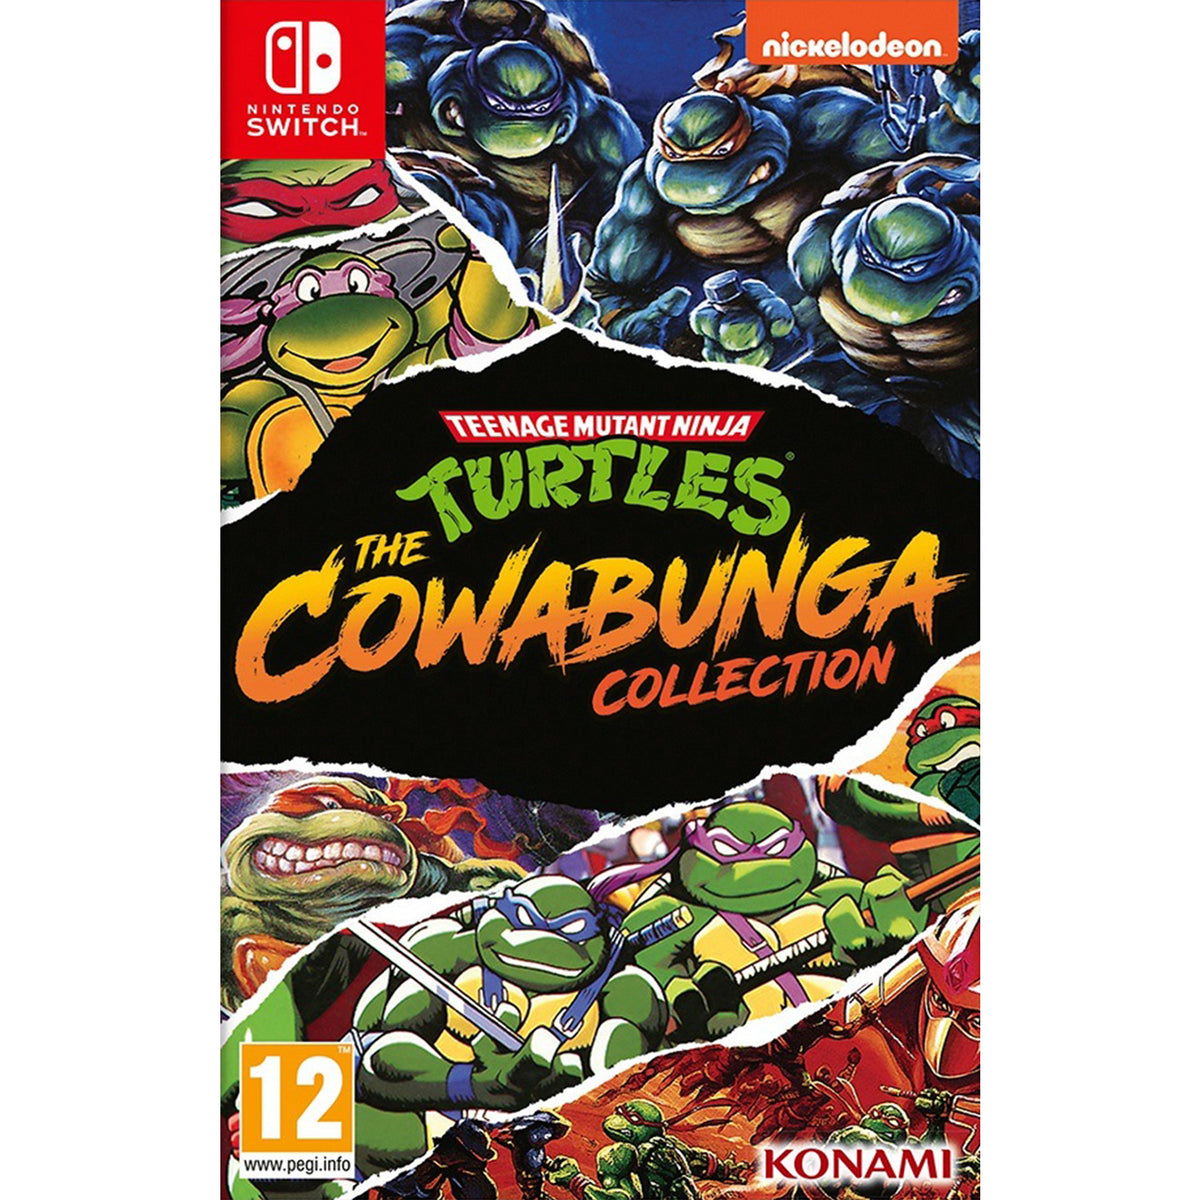 Teenage Mutant Ninja Turtles: The Cowabunga Collection - Switch –  Entertainment Go's Deal Of The Day!